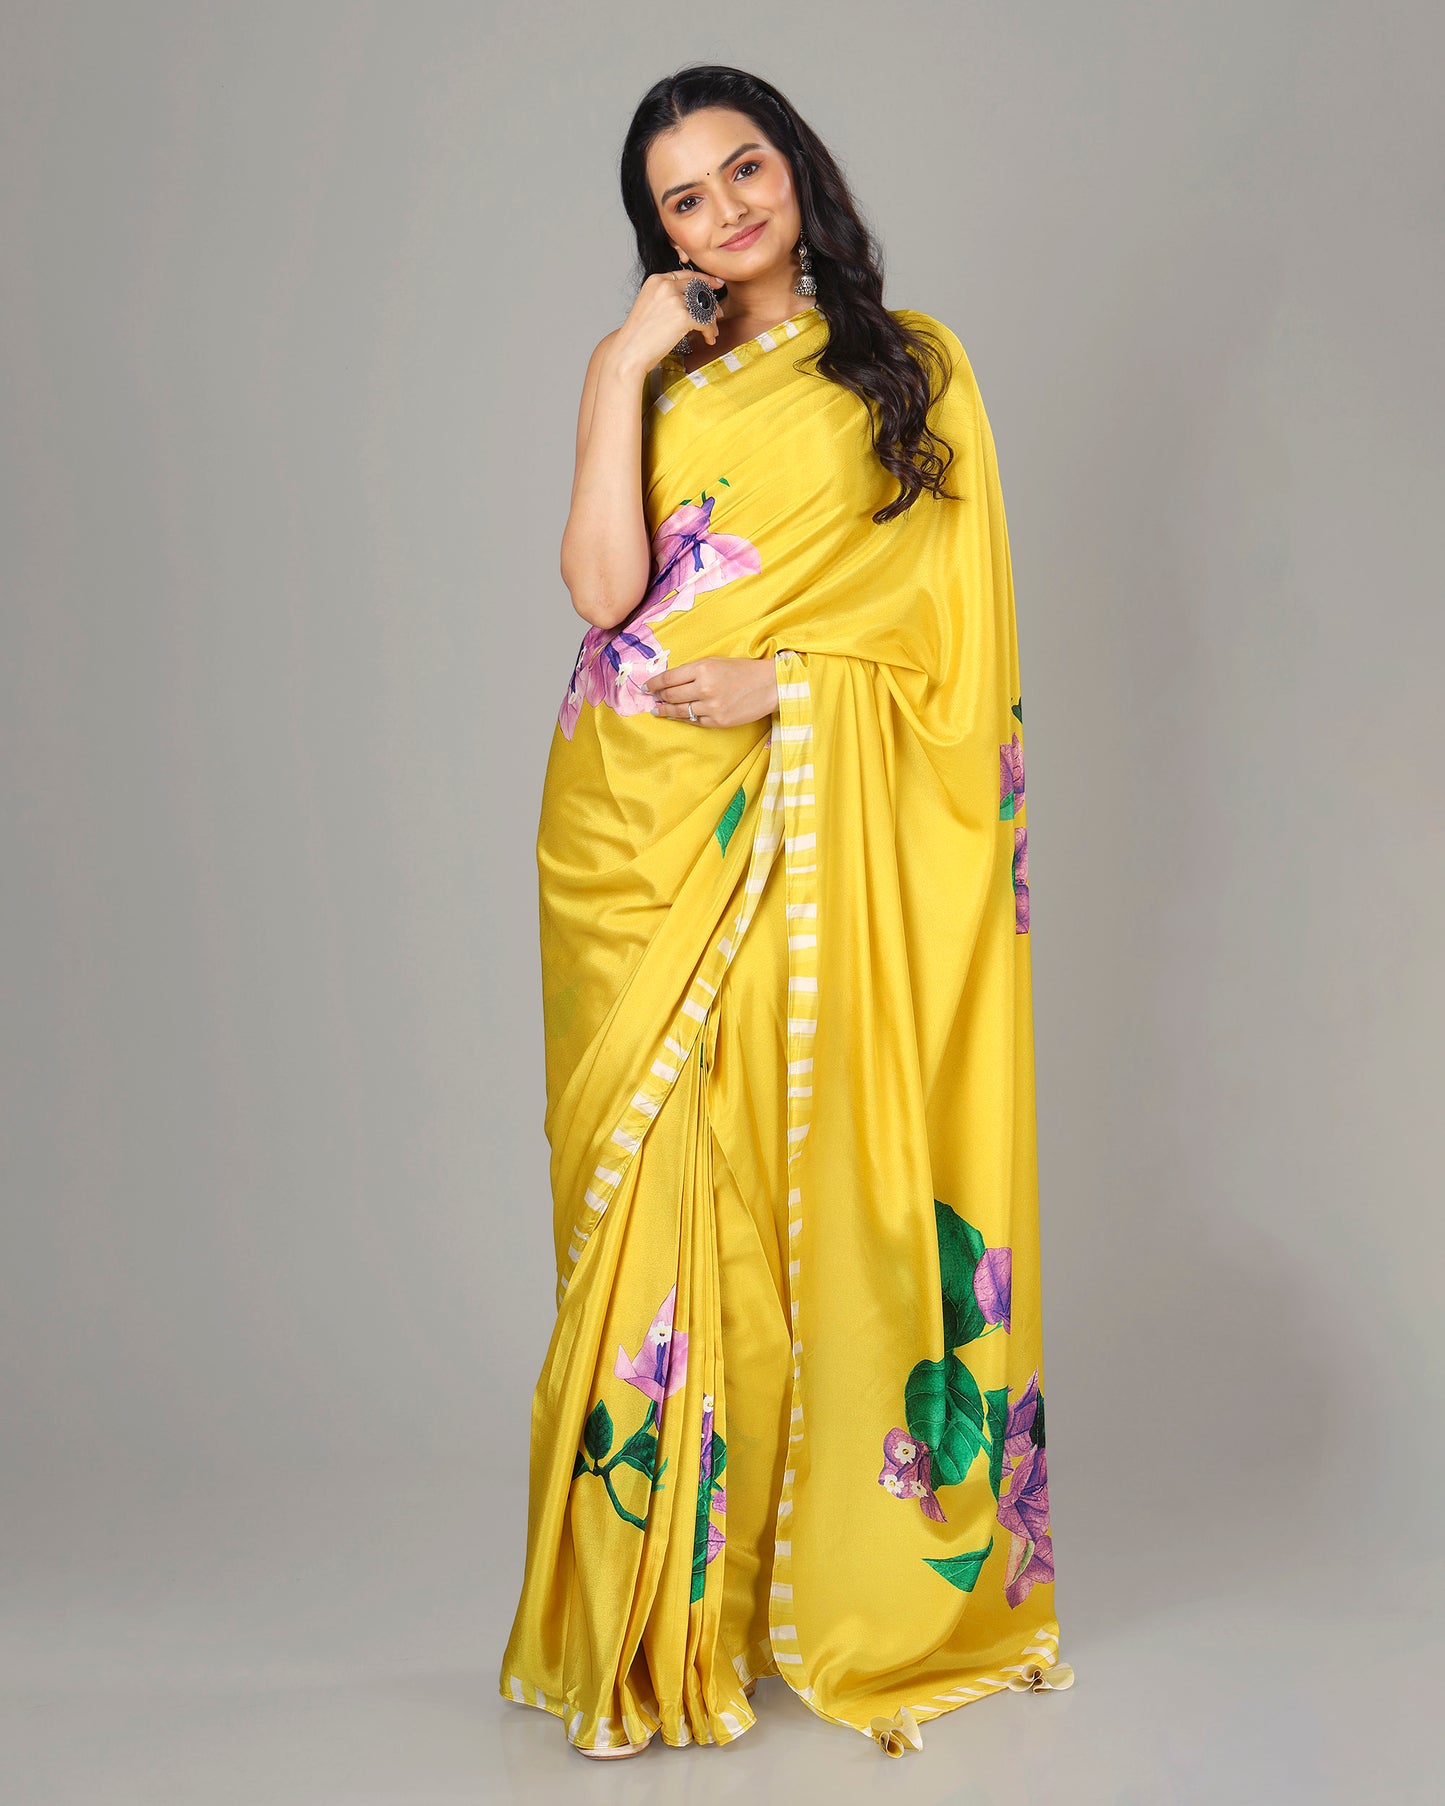 Exclusive Floral Women's Designer Bollywood Ready To Wear Saree